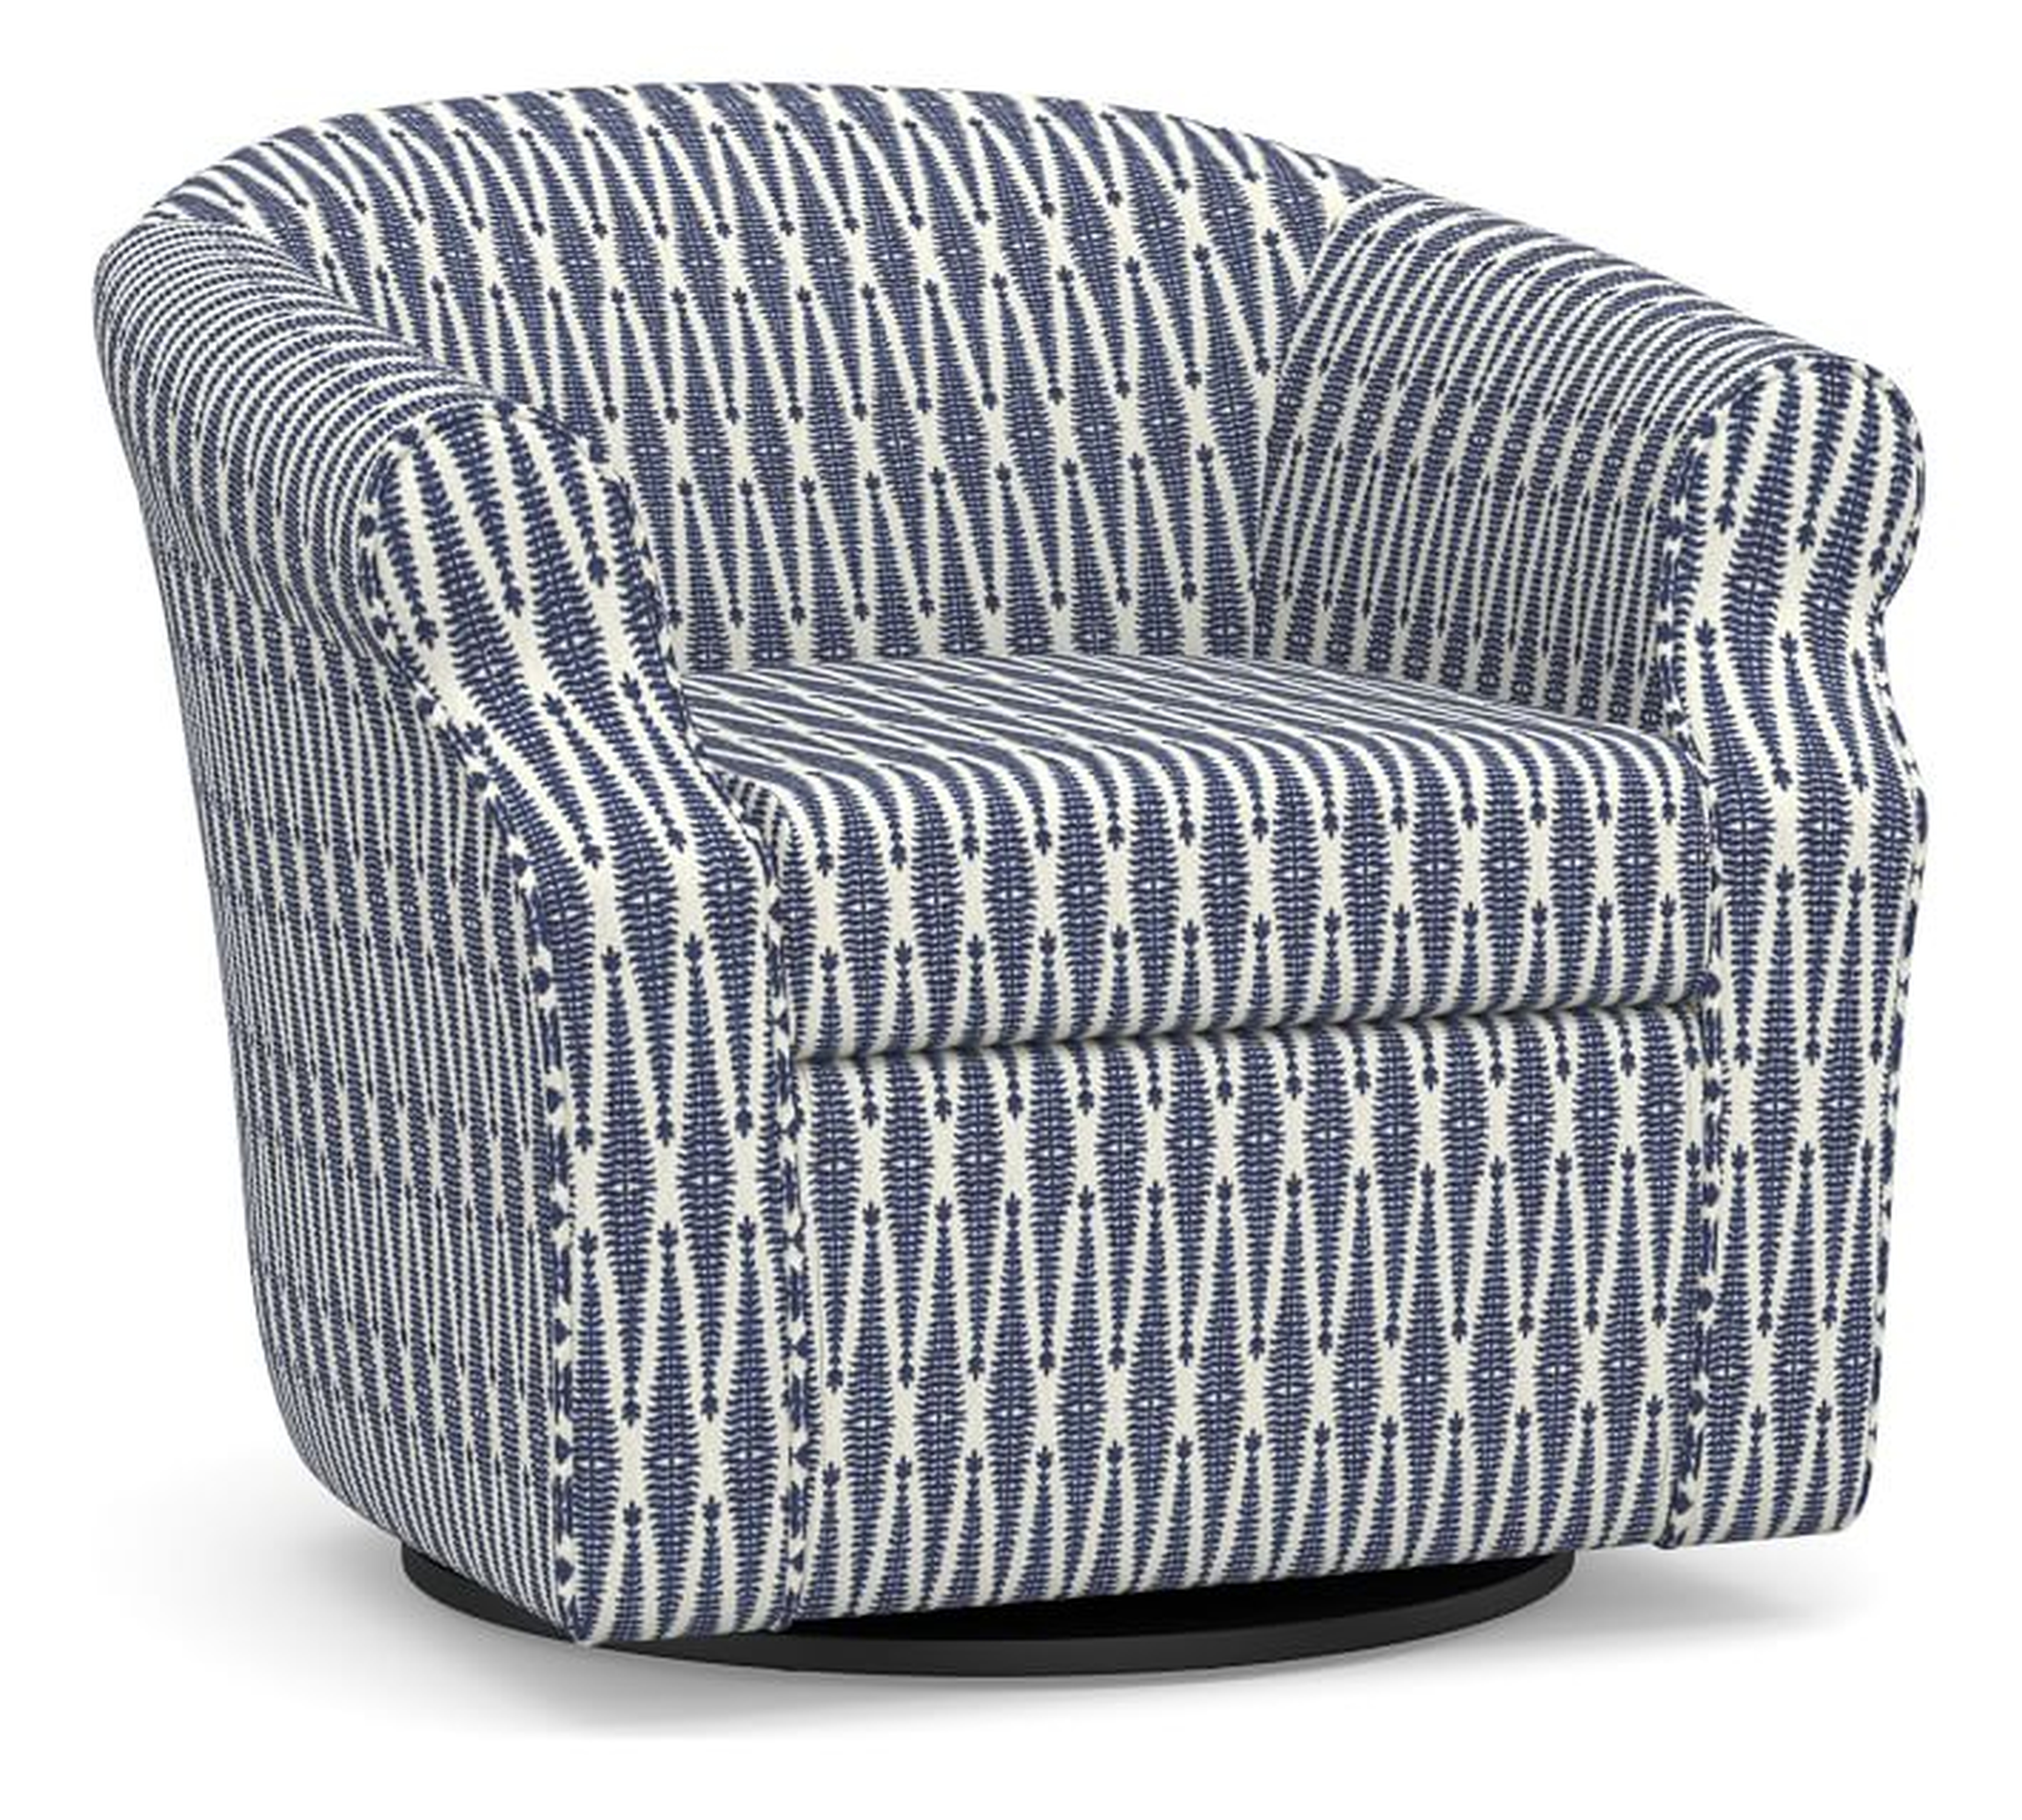 SoMa Lyndon Upholstered Swivel Armchair, Polyester Wrapped Cushions, Shalimar Jacquard Blue - Pottery Barn